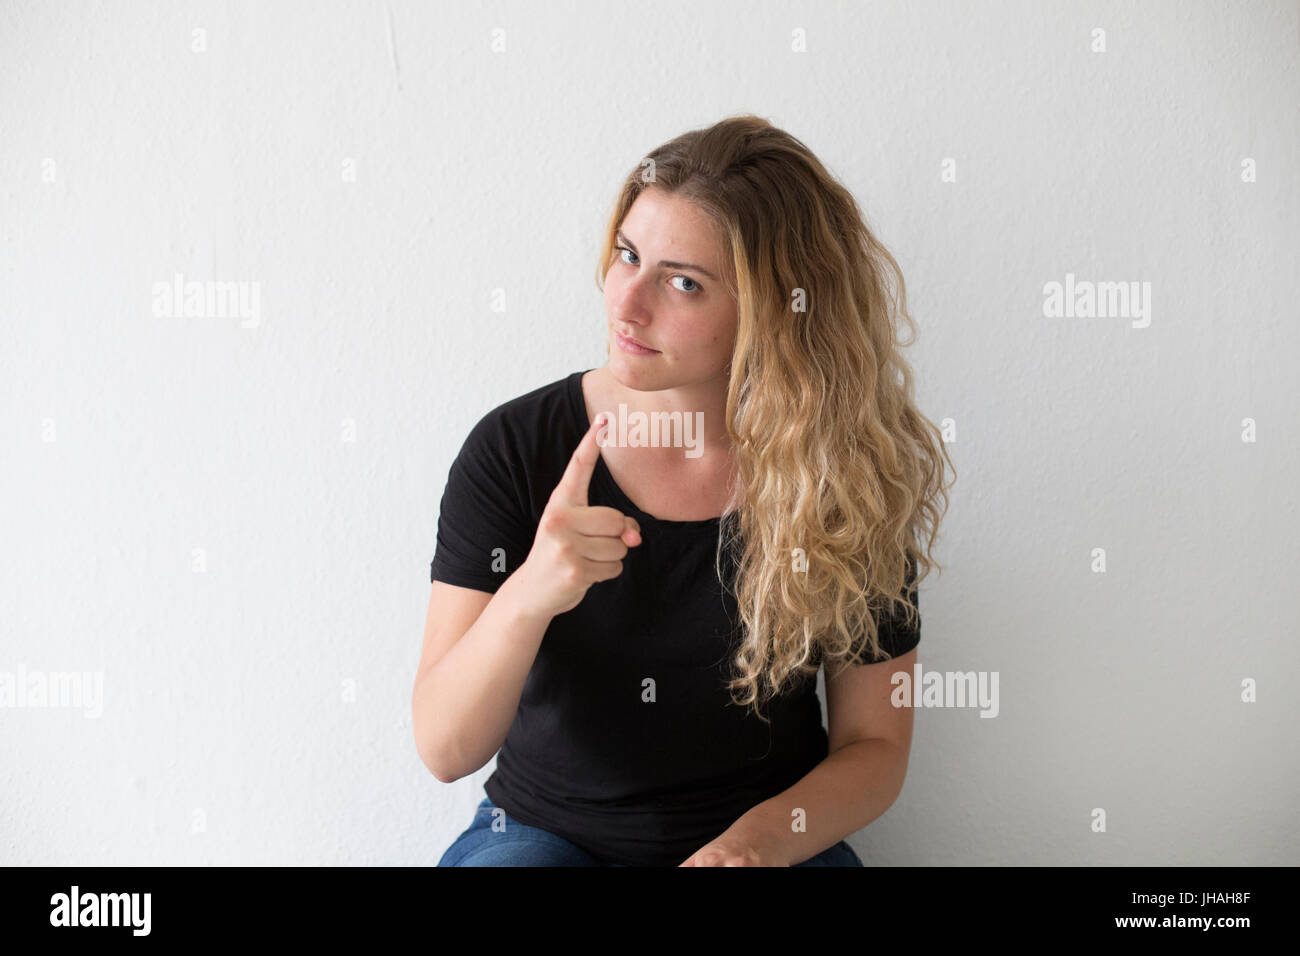 Young, blonde, caucasian woman expresses negative emotion, anger, screaming and finger pointing at viewer and photographer on a white background. Stock Photo